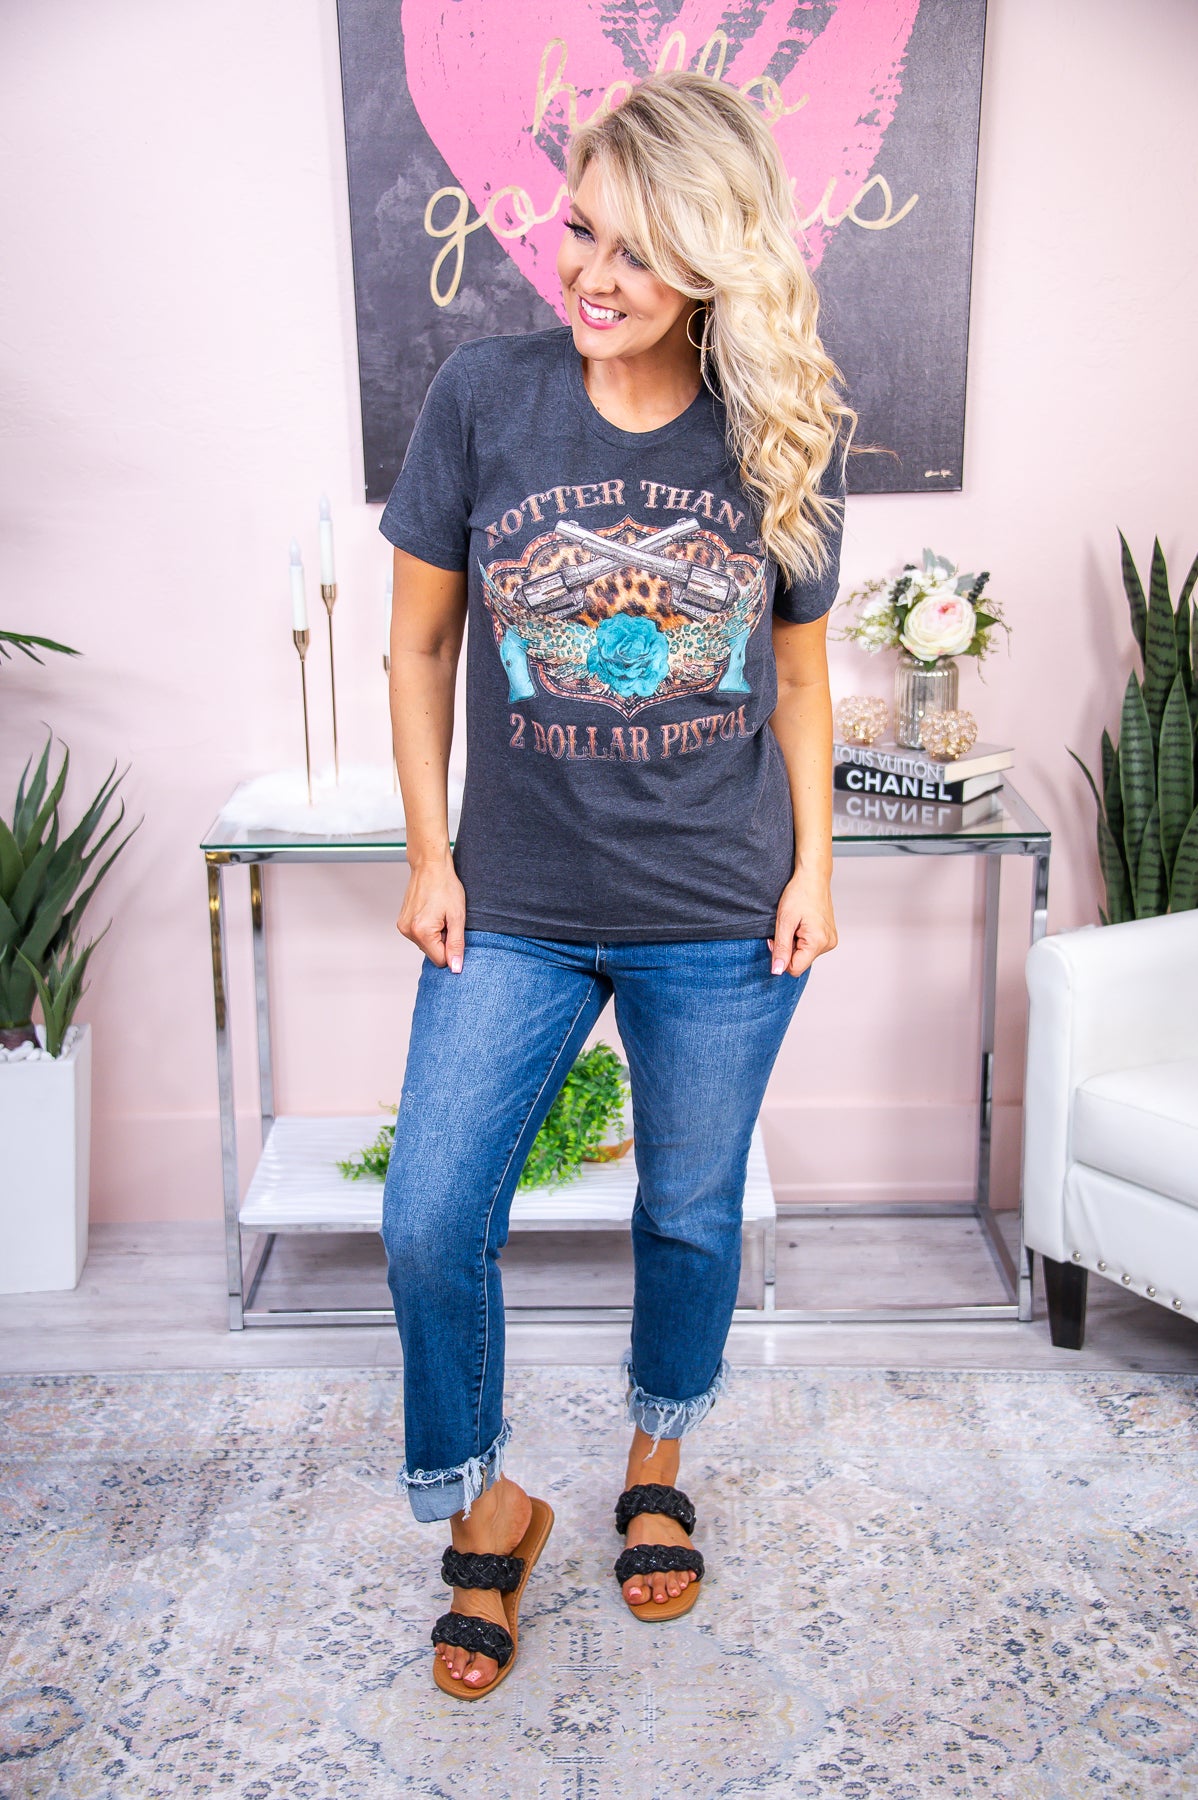 Hotter Than A Two Dollar Pistol Dark Heather Gray Graphic Tee - A2871DHG